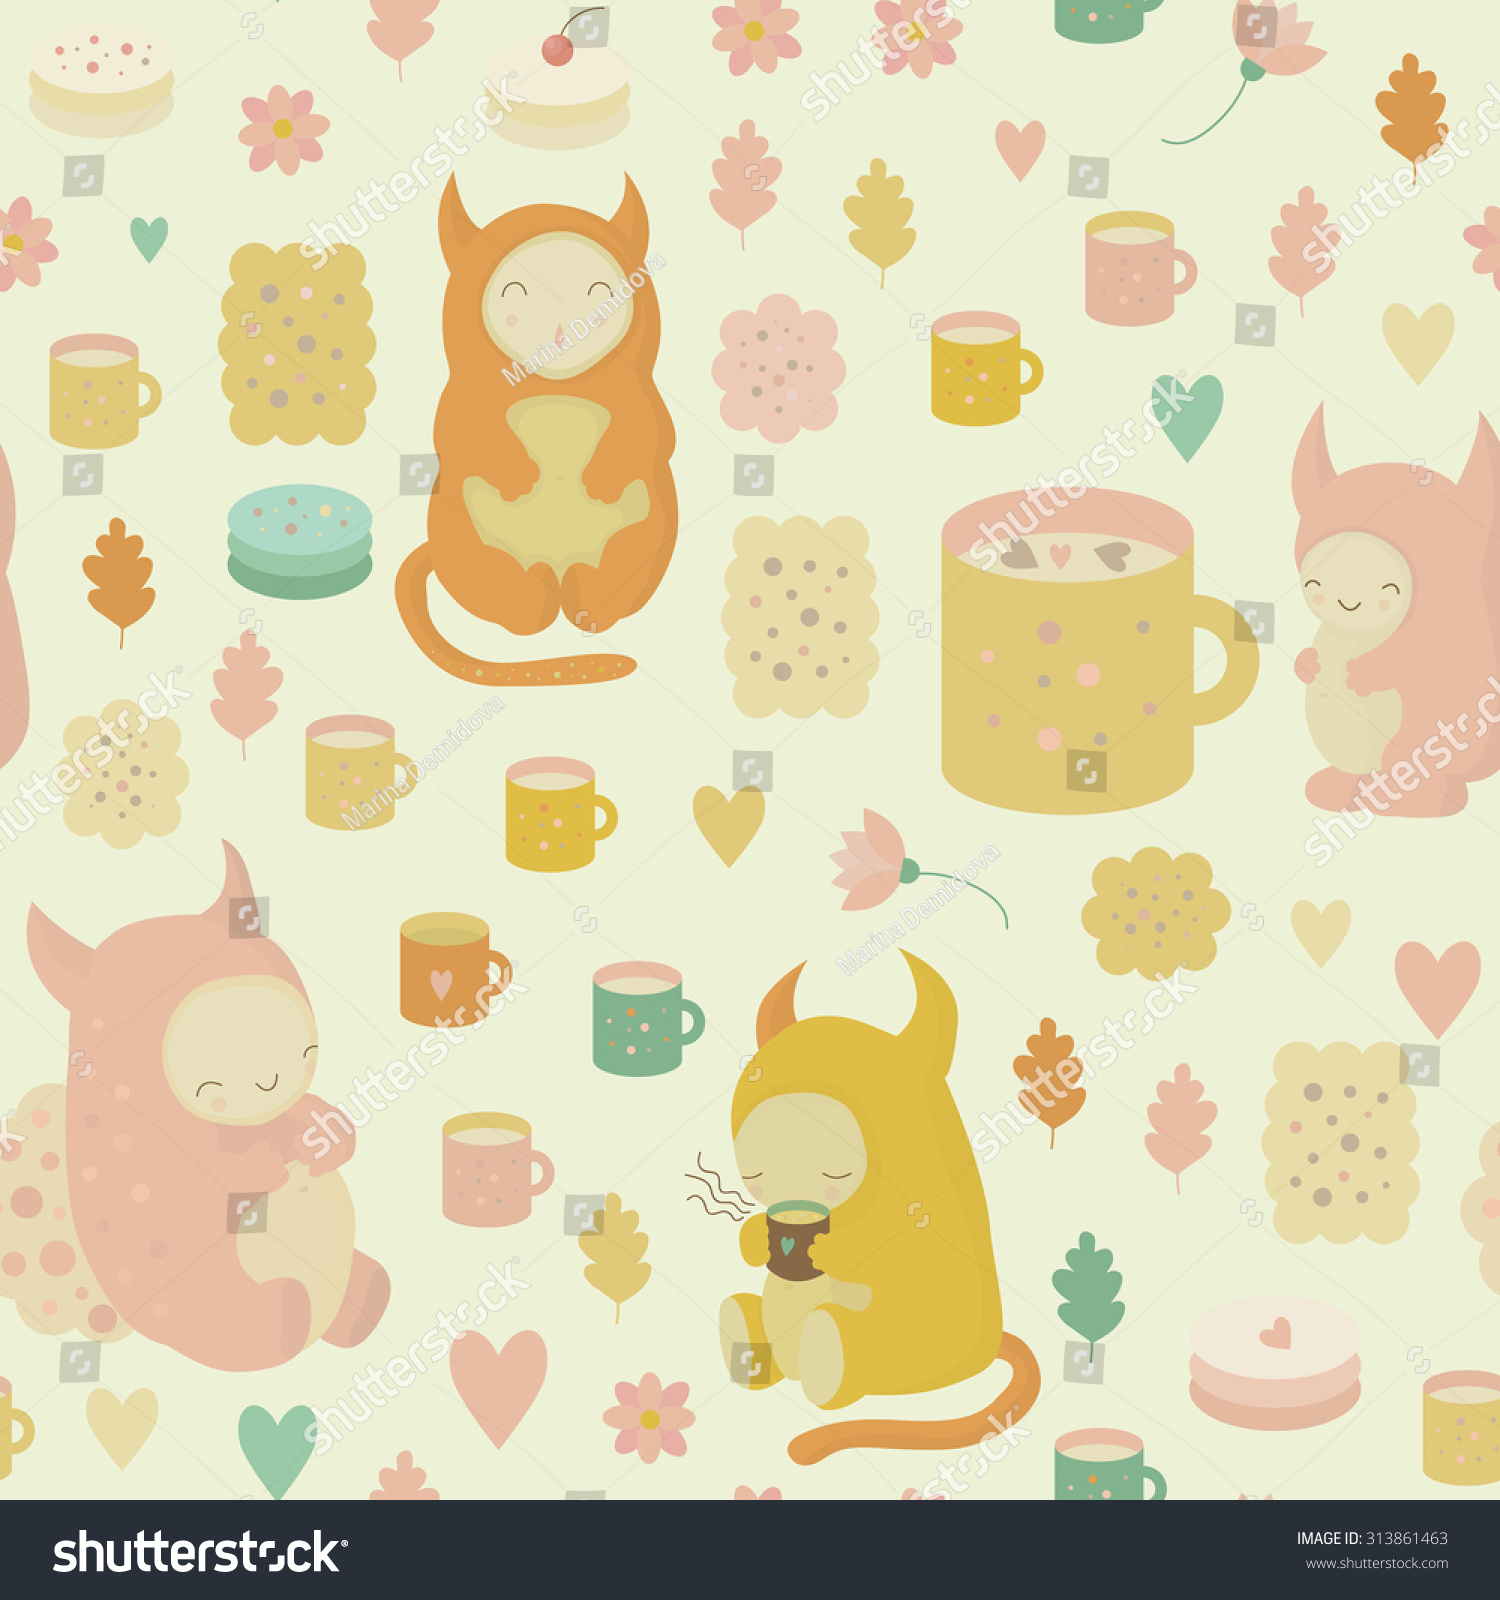 SVG of Childish dreamy seamless background with cute monsters, tea, mugs, cookies, cakes, cocoa  and flowers in vector. Seamless pattern can be used for wallpapers, textile, fabric, web backgrounds svg